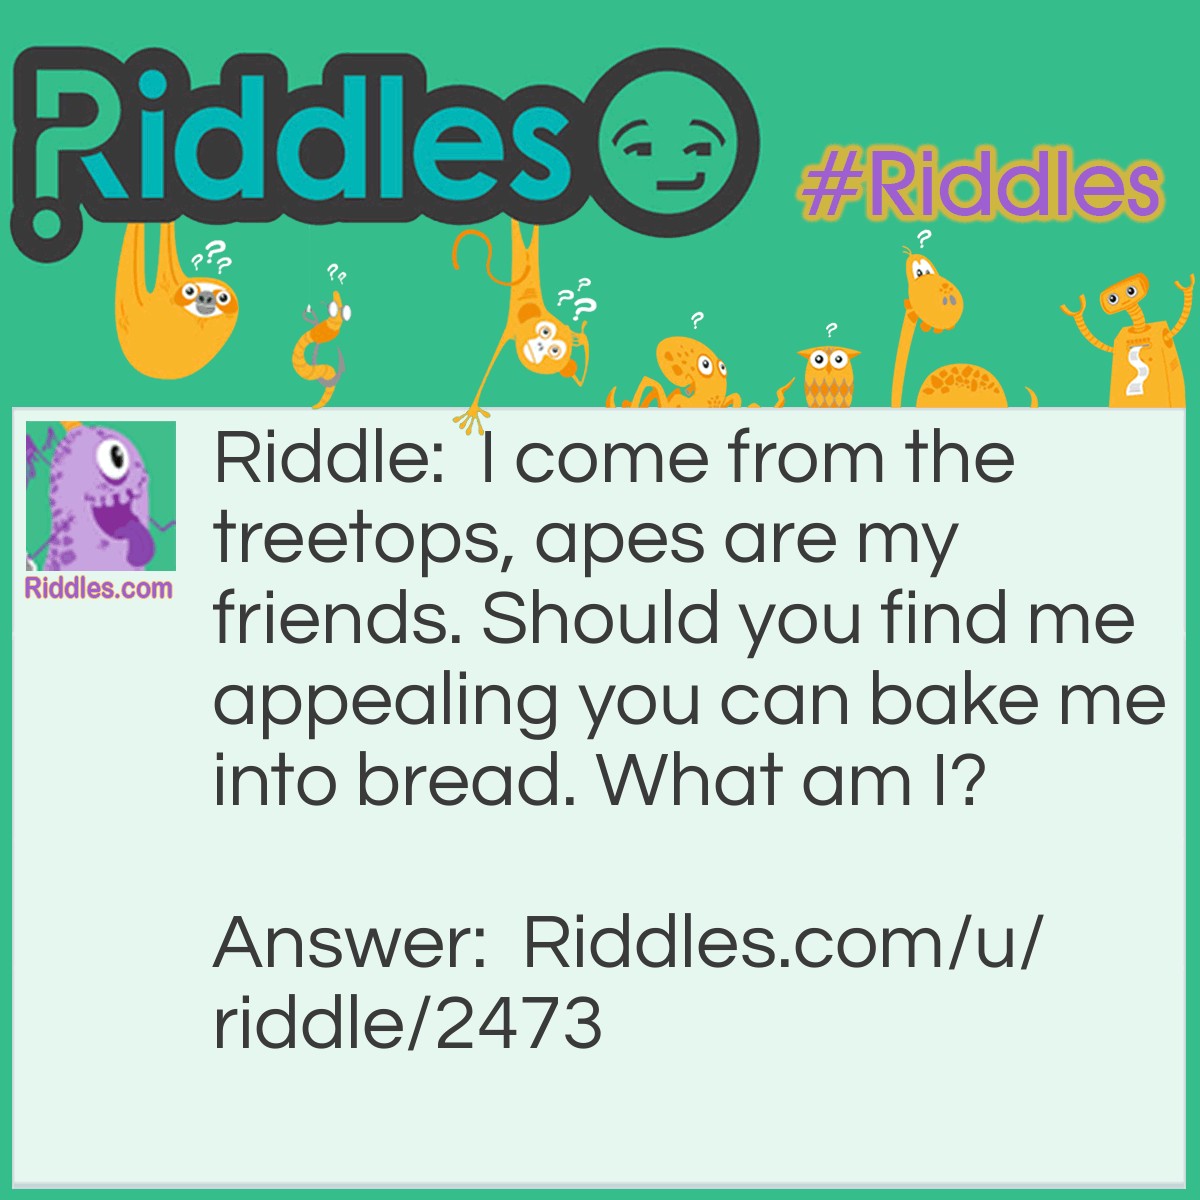 Riddle: I come from the treetops, apes are my friends. Should you find me appealing you can bake me into bread. What am I? Answer: A banana.